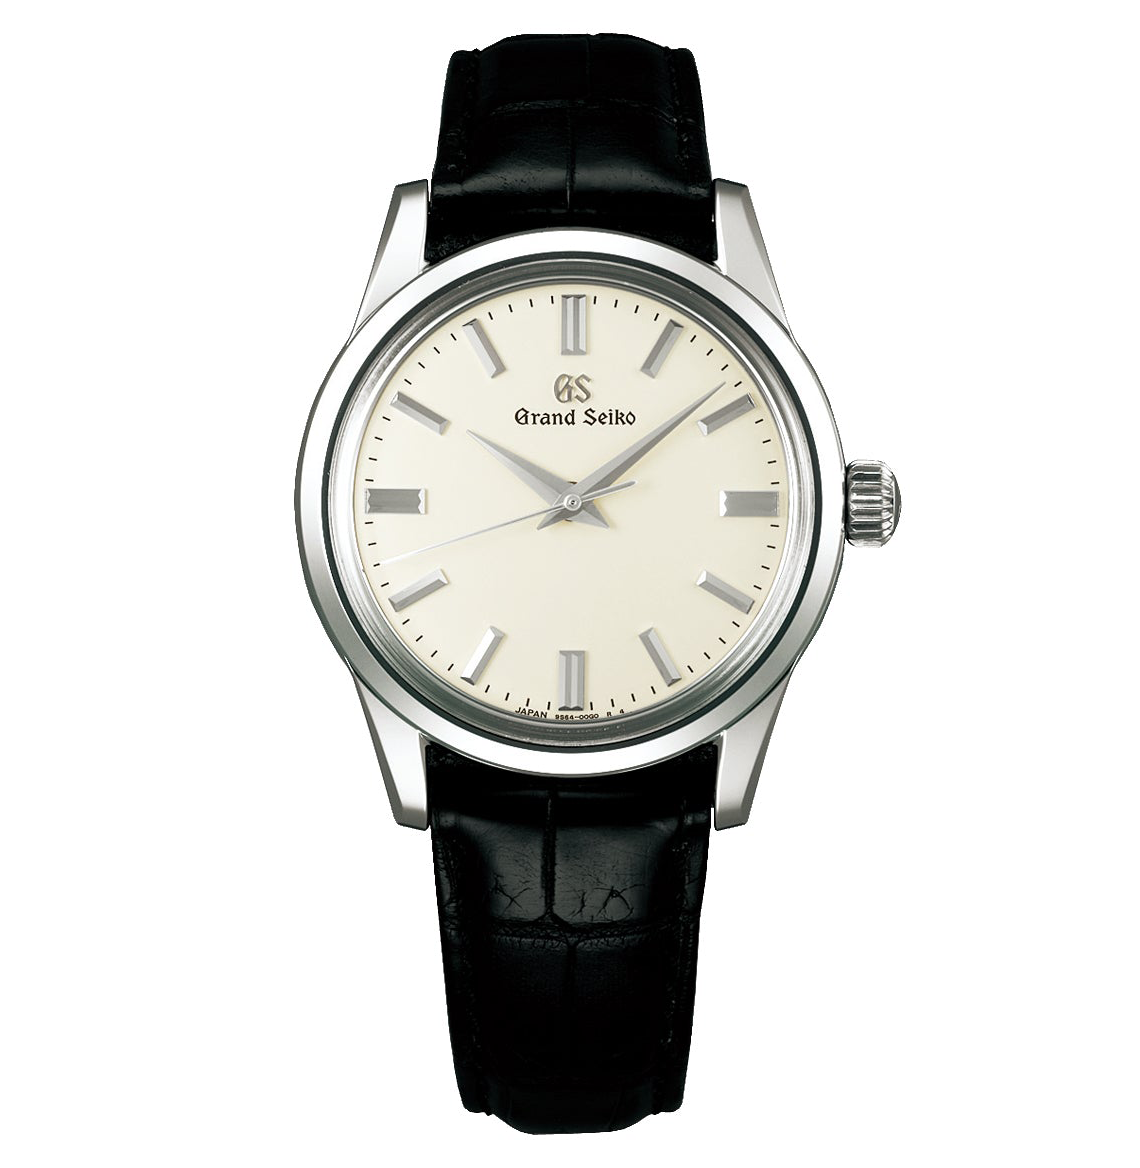 Grand Seiko Elegance Watch with Ivory Dial and Black Strap, 37mm